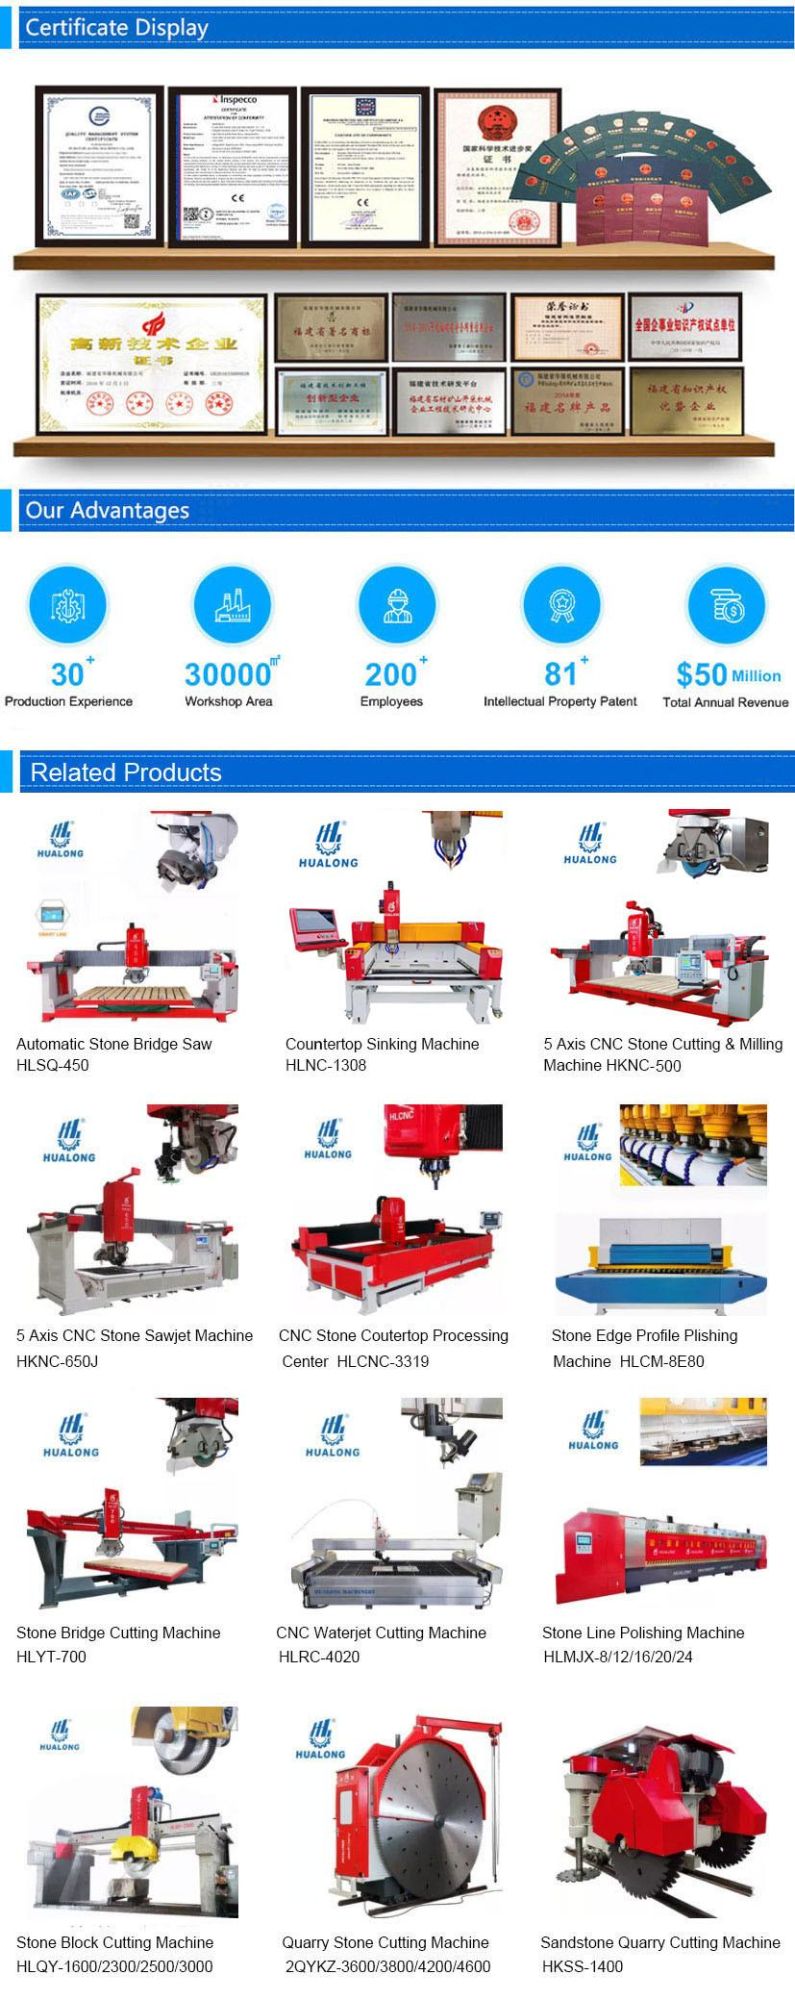 Hualong Stone Machinery 5 Axis CNC Waterjet Cutting Machine Glass Ceramic Steel Cutting Milling Machine by Water with Abraive Stone Tile Cutter Machine